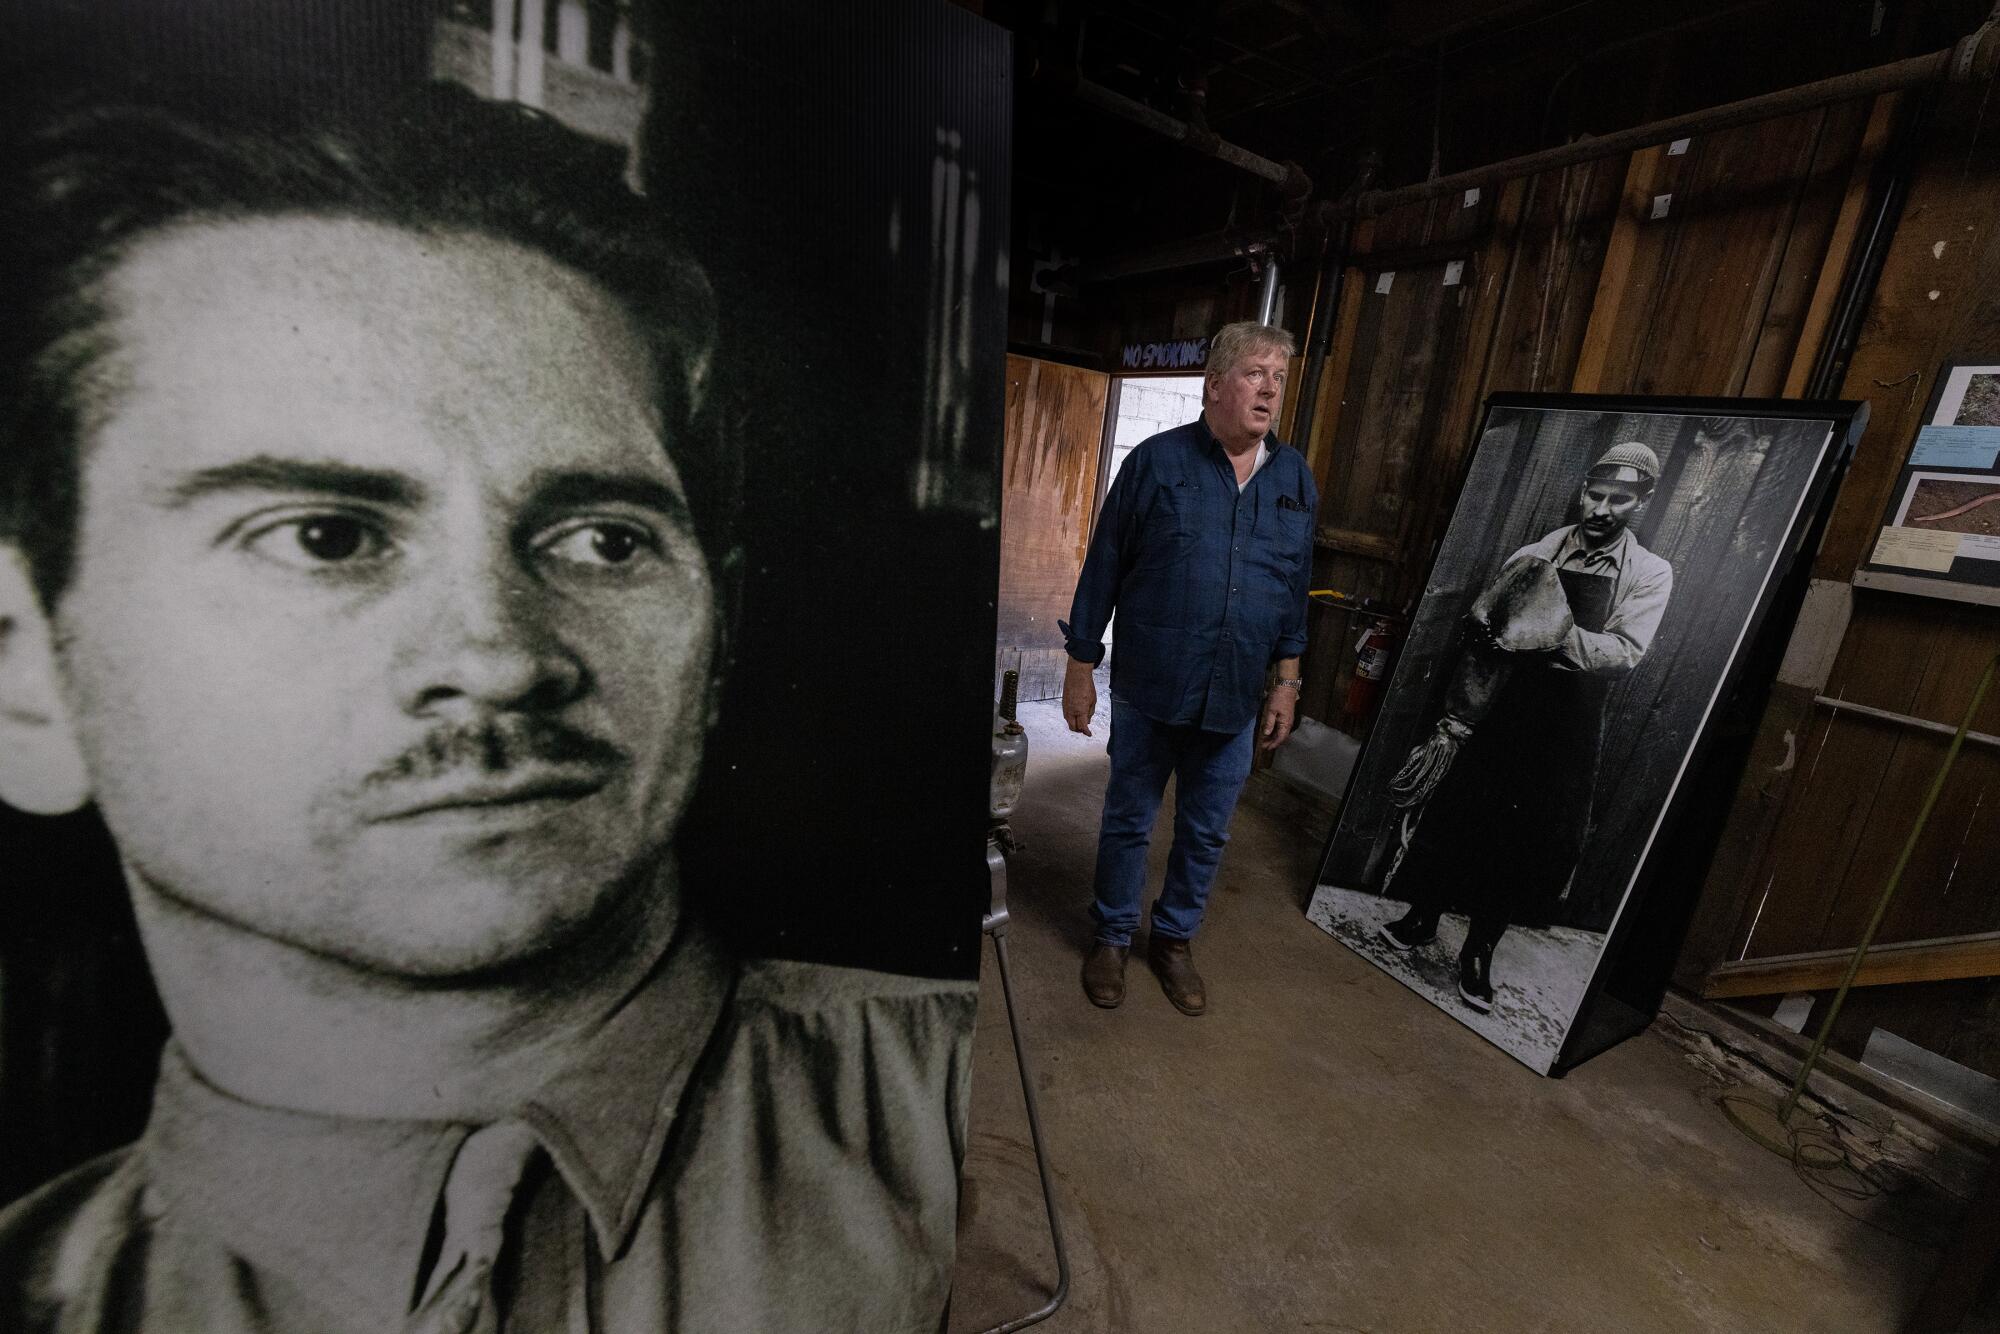 A man stands near the open door of a room that contains two large portrait photos. 